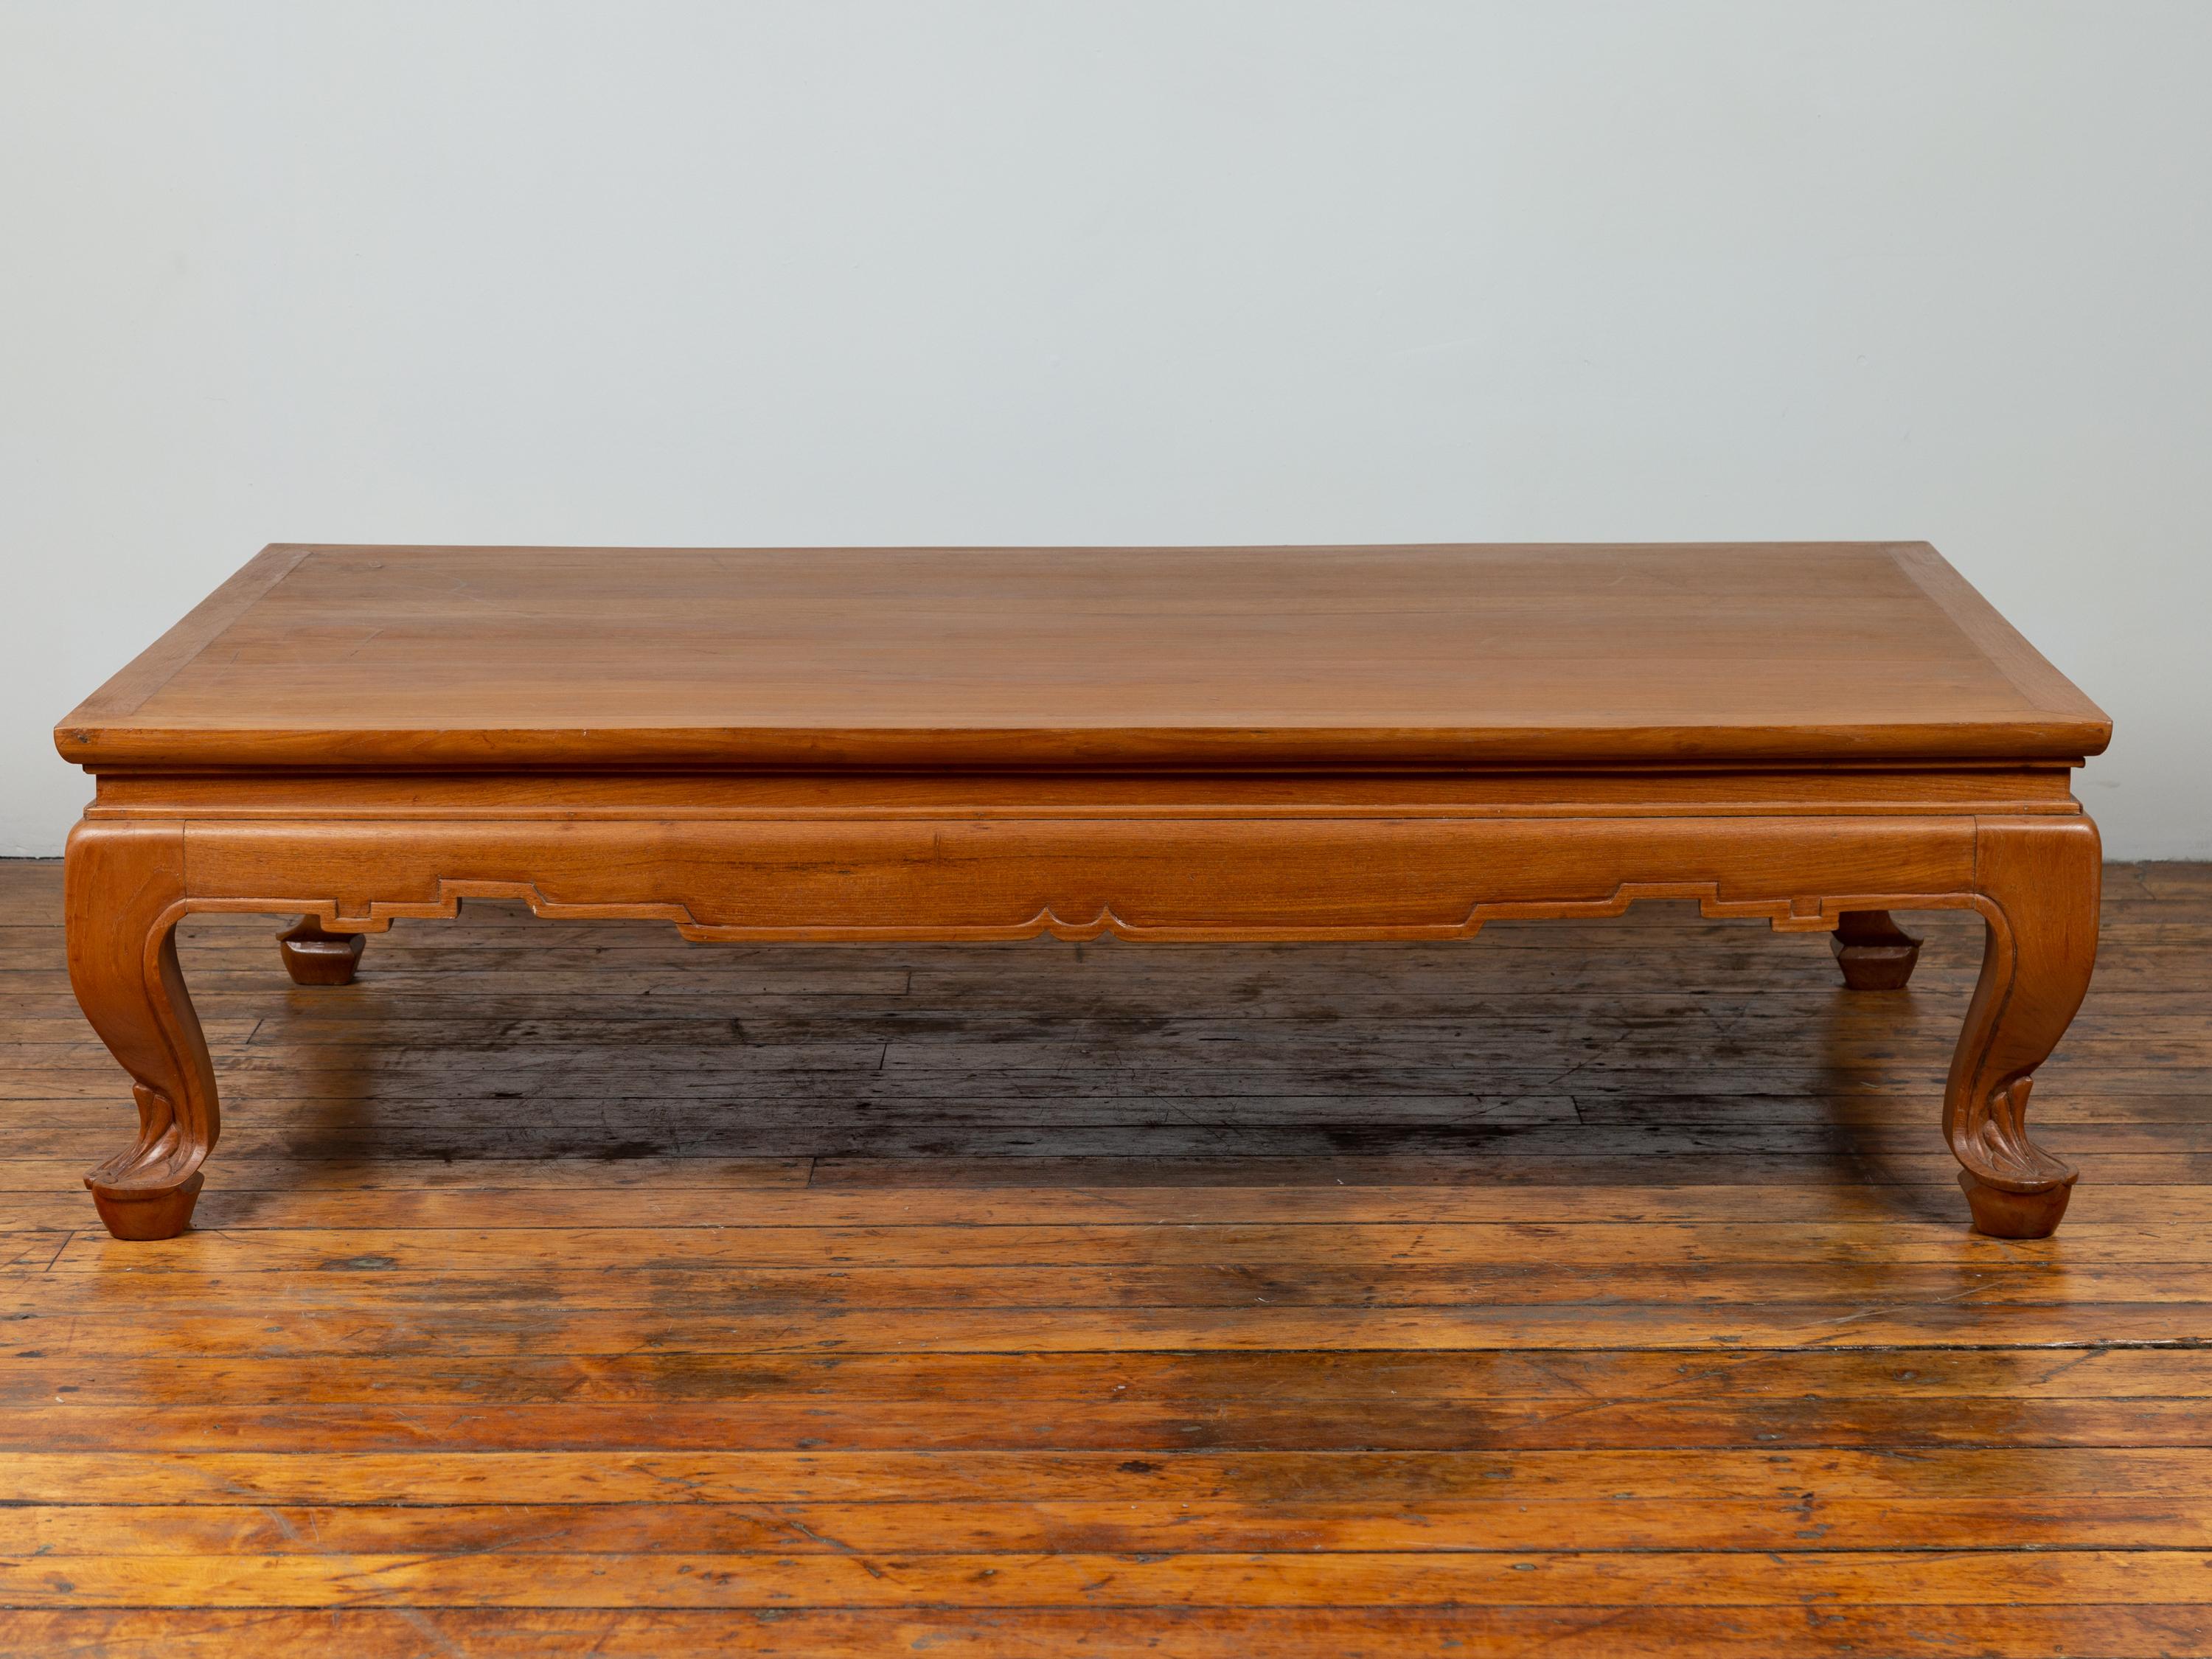 A vintage Thai teak coffee table from the mid-20th century, with waisted top, carved apron and cabriole legs. Born in Thailand during the mid-century period, this handsome coffee table features a rectangular planked waisted top sitting above a